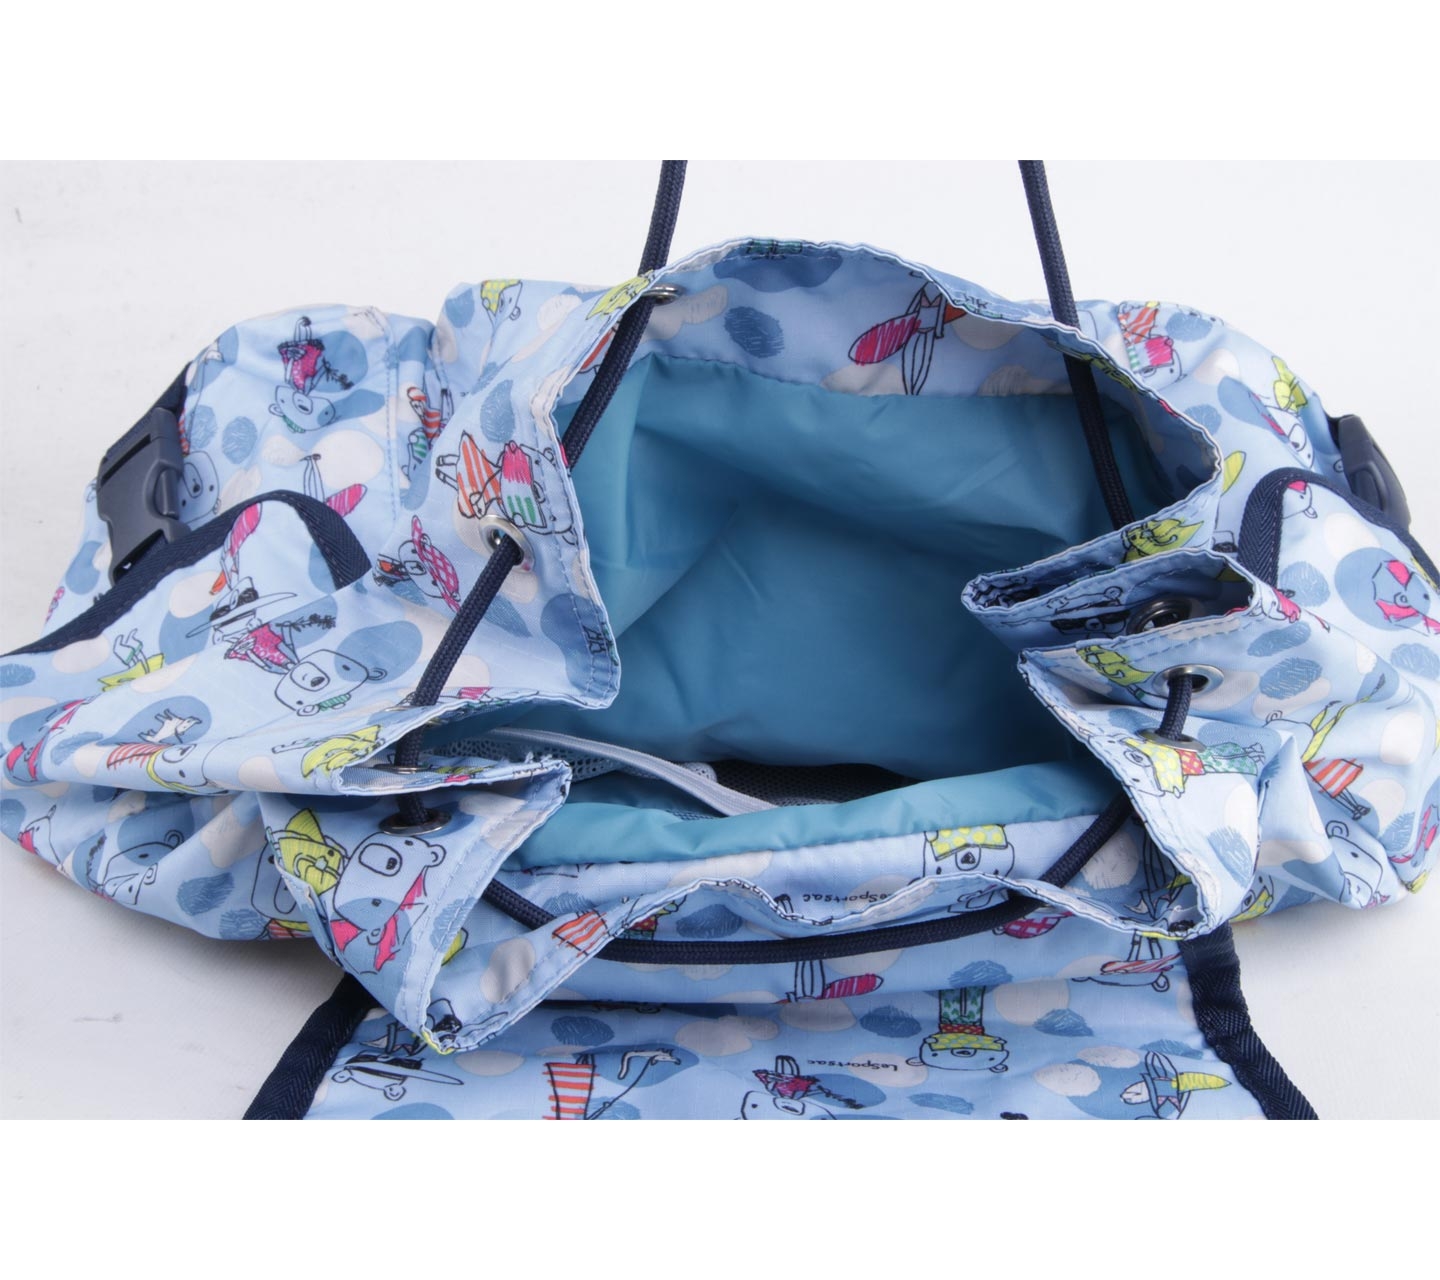 Le Sportsac Blue Patterned Backpack